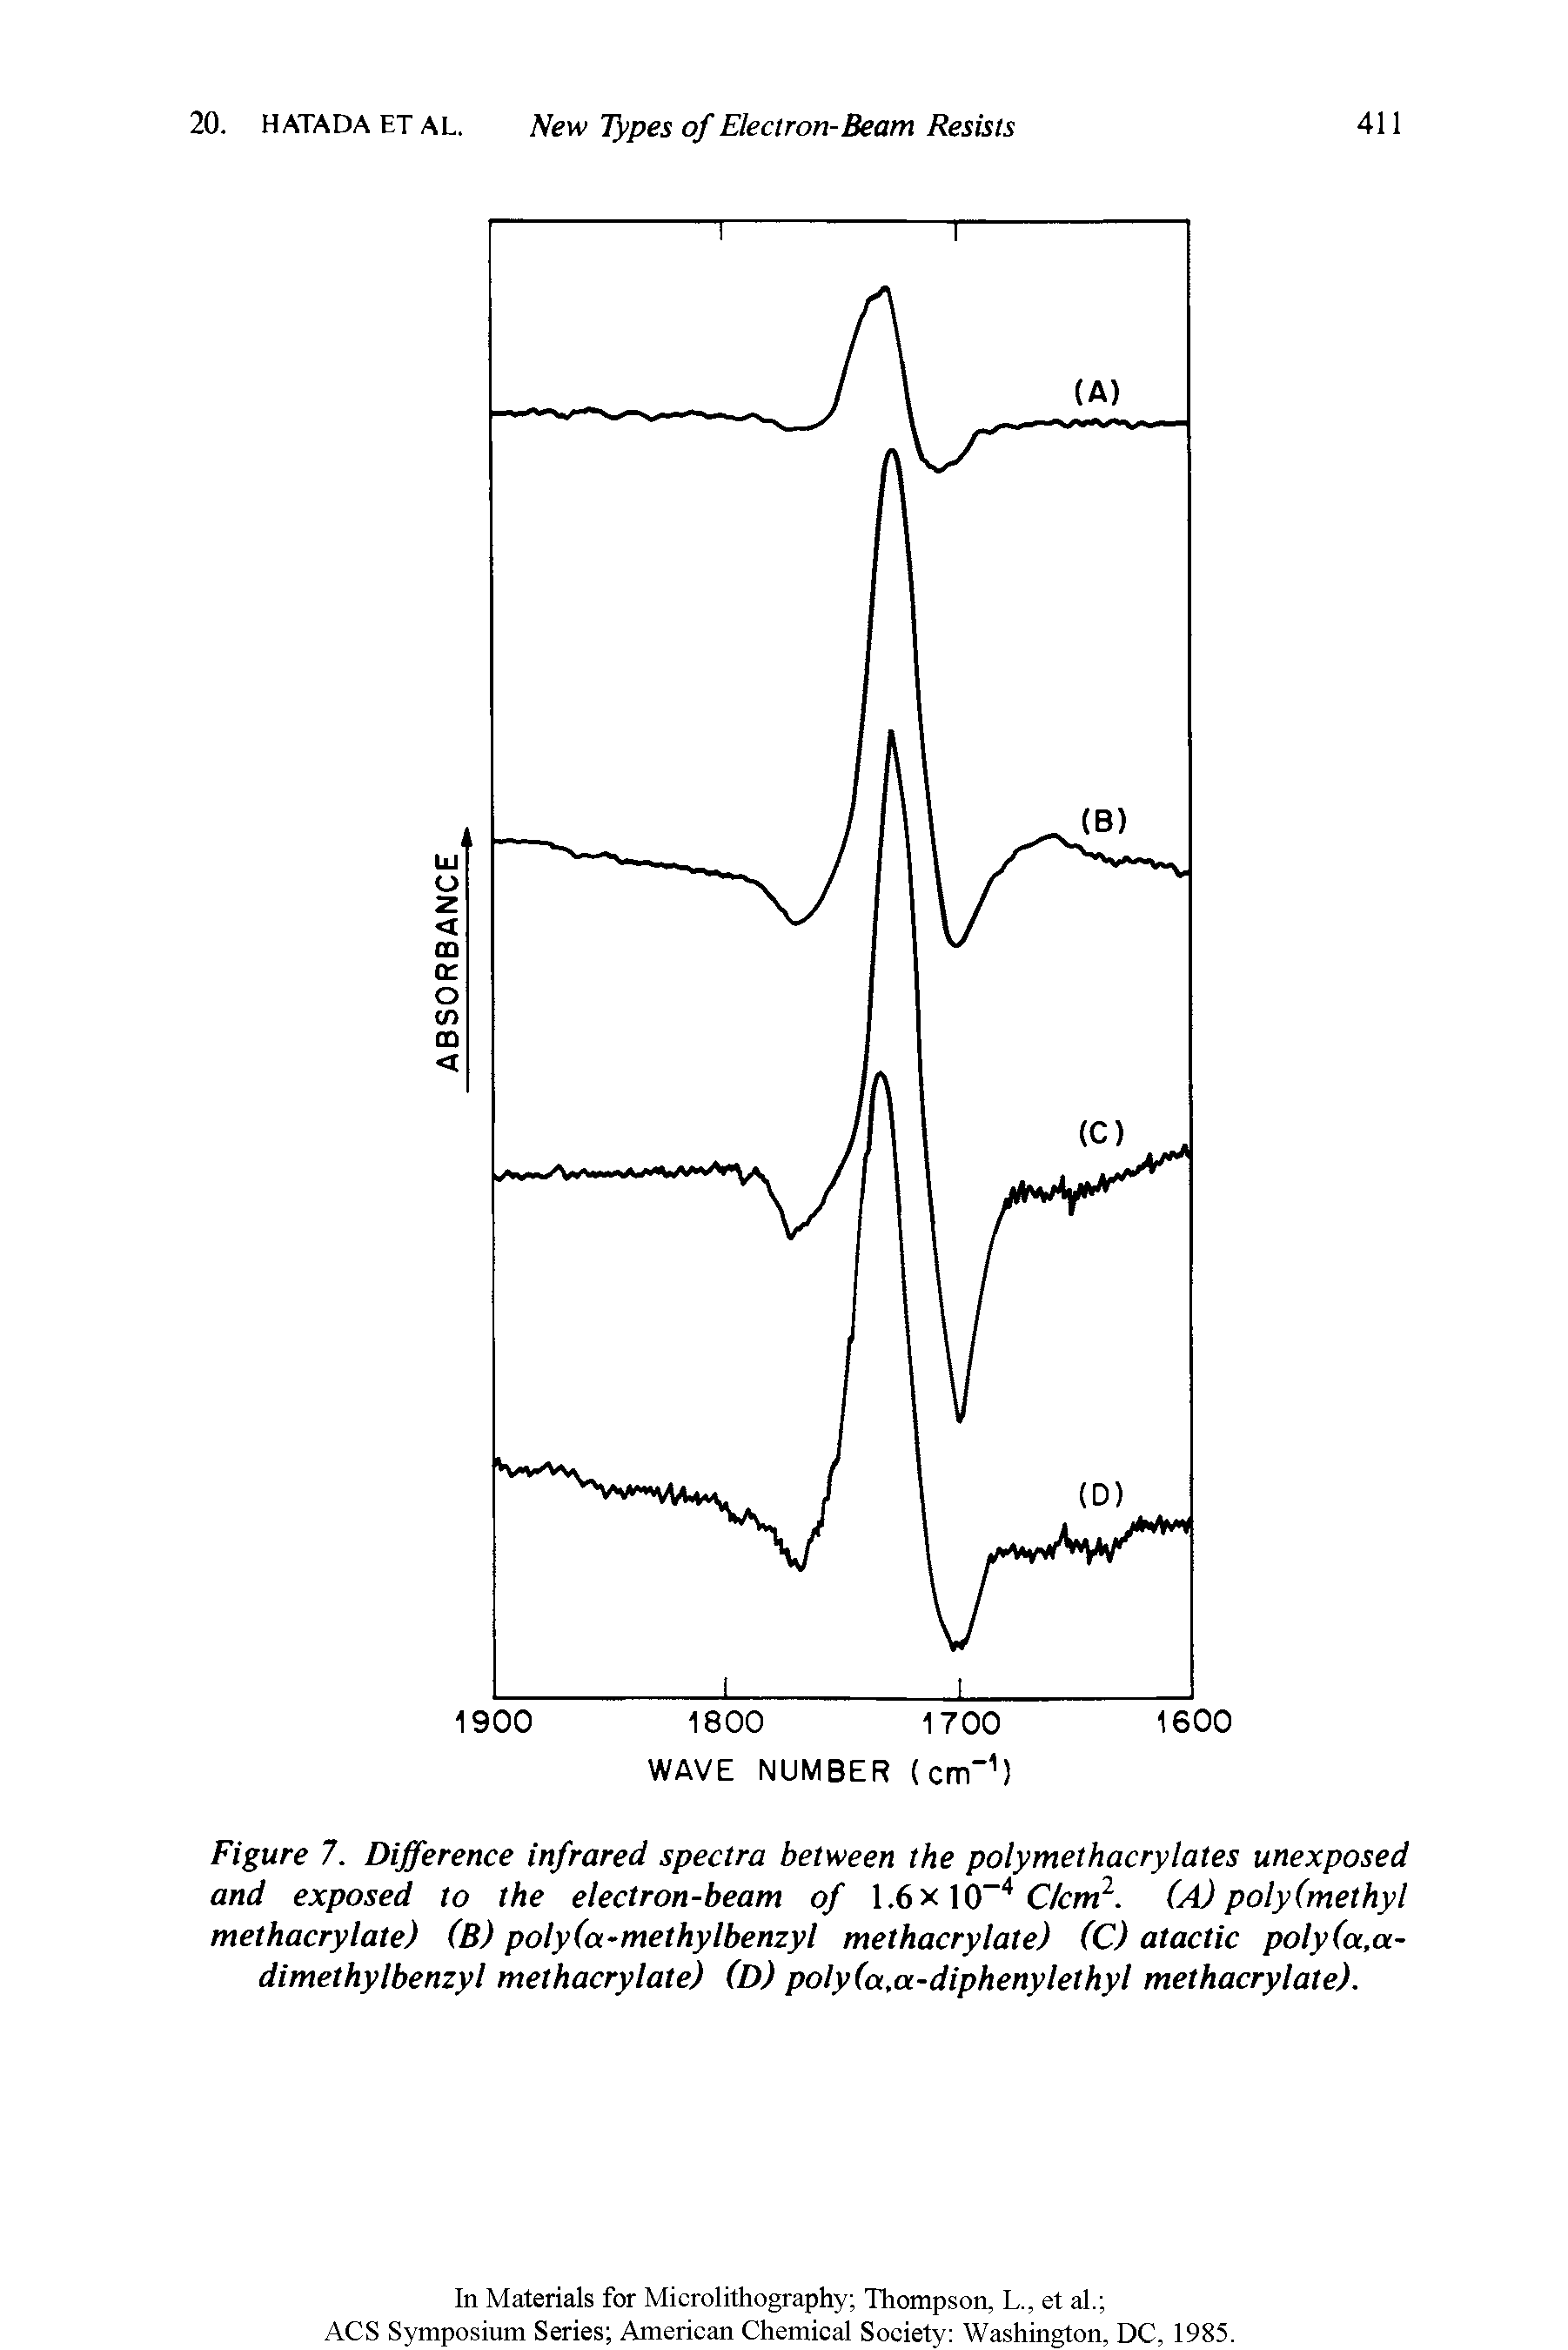 Figure 7. Difference infrared spectra between the polymethacrylates unexposed and exposed to the electron-beam of 1.6x10 4 C/cm2. (A) poly (methyl methacrylate) (B) poly(a-methylbenzyl methacrylate) (C) atactic poly(a,a-dimethylbenzyl methacrylate) (D) poly(a,a-diphenylethyl methacrylate).